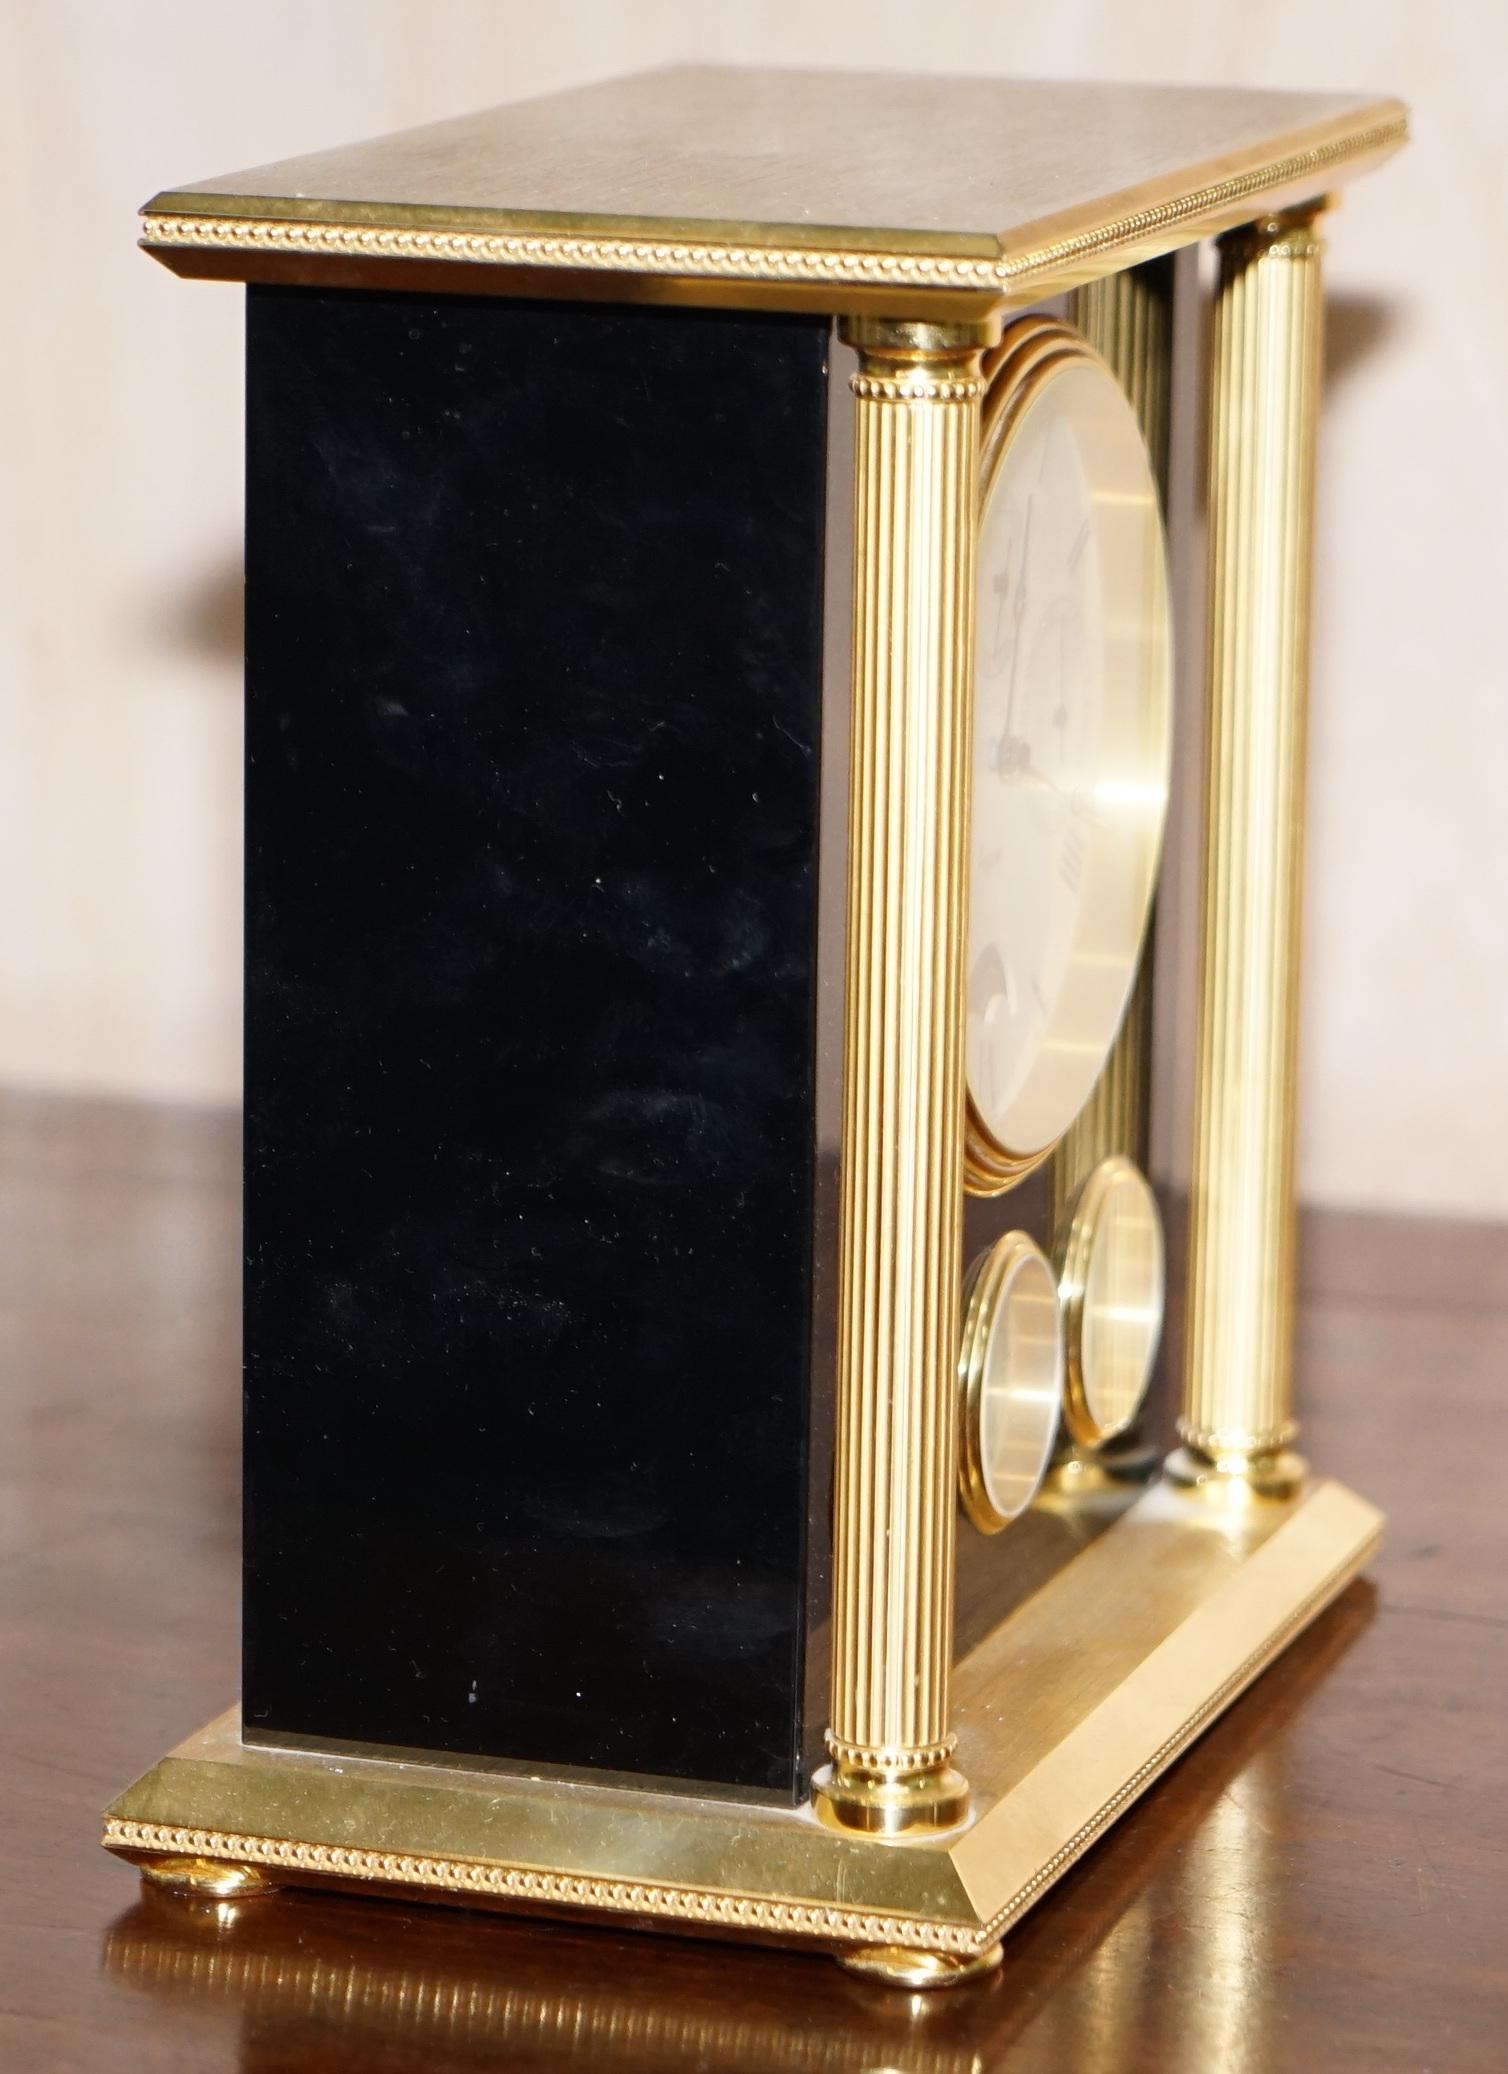 Brass Rare Find Asprey London Swiss Made Moon Phase Clock with Barometer and Calendar